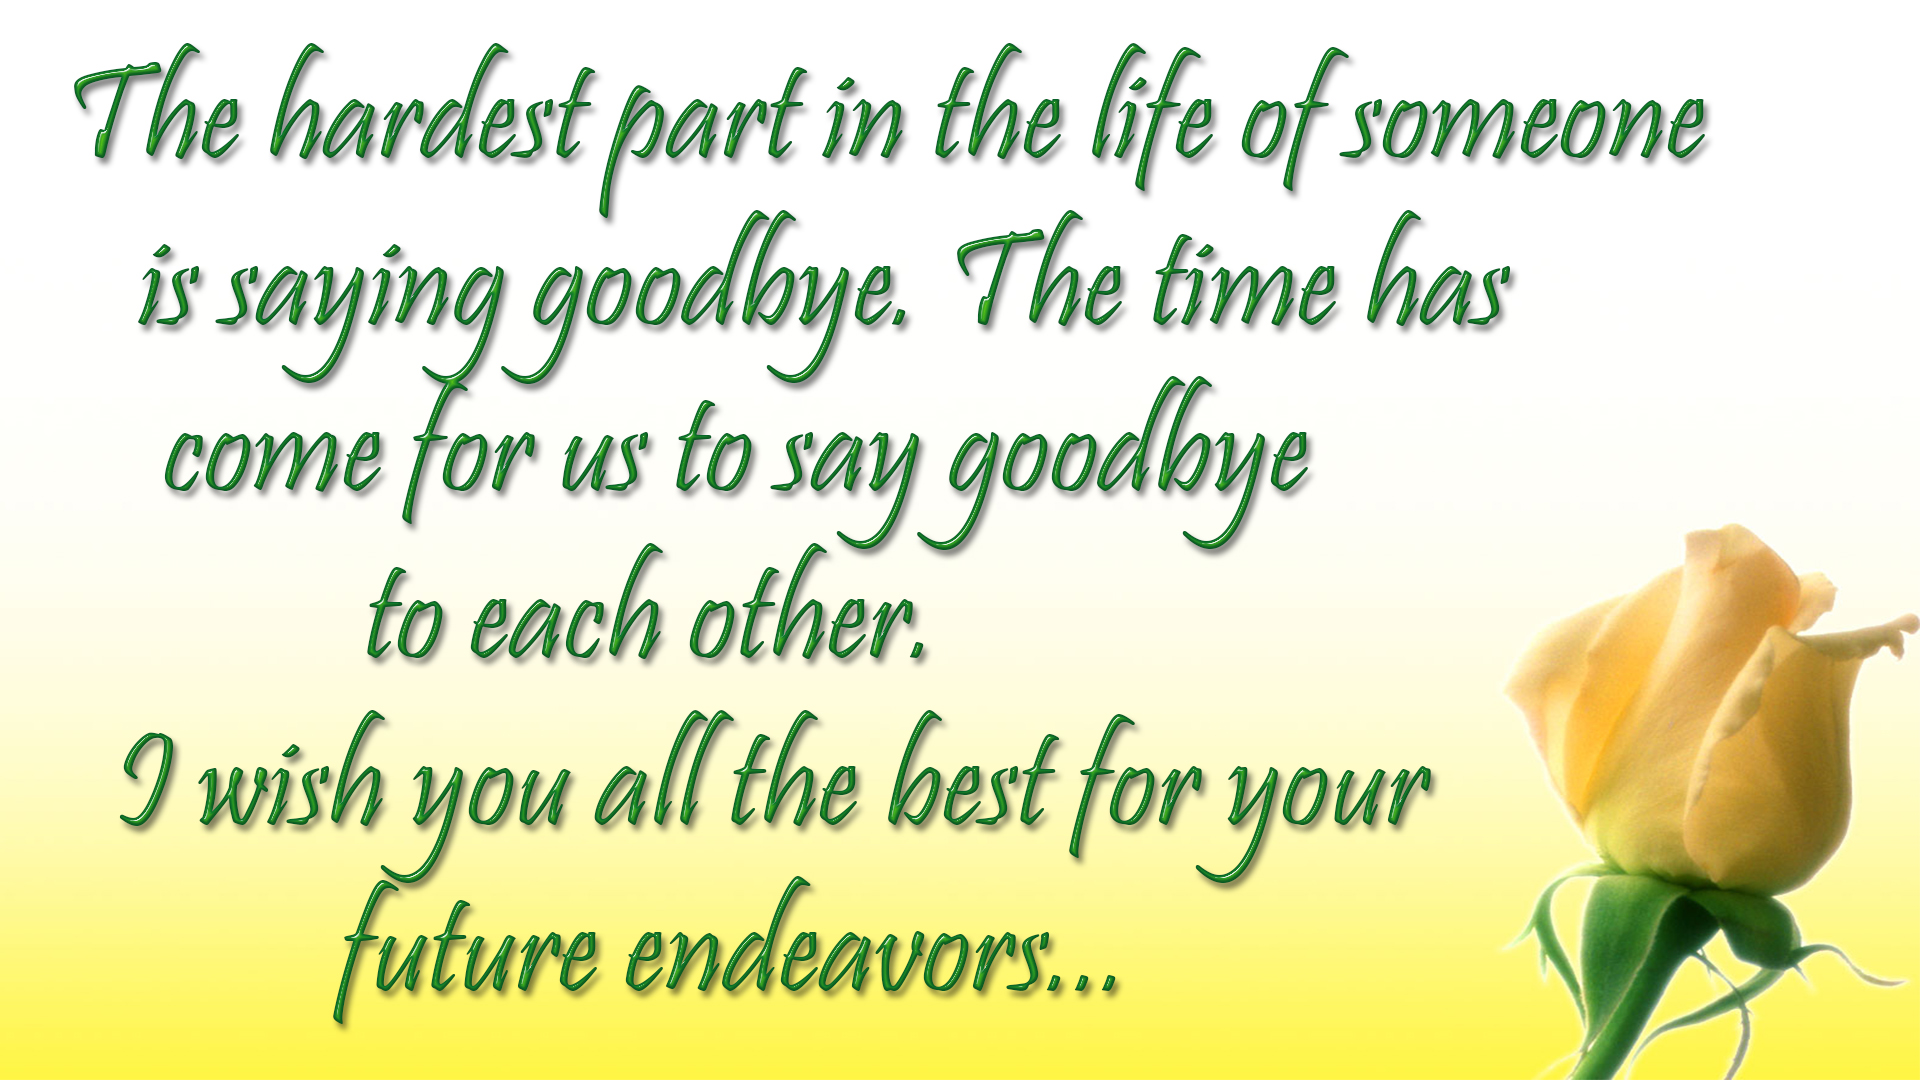 Unique Farewell Wishes, Messages & Cards Images.